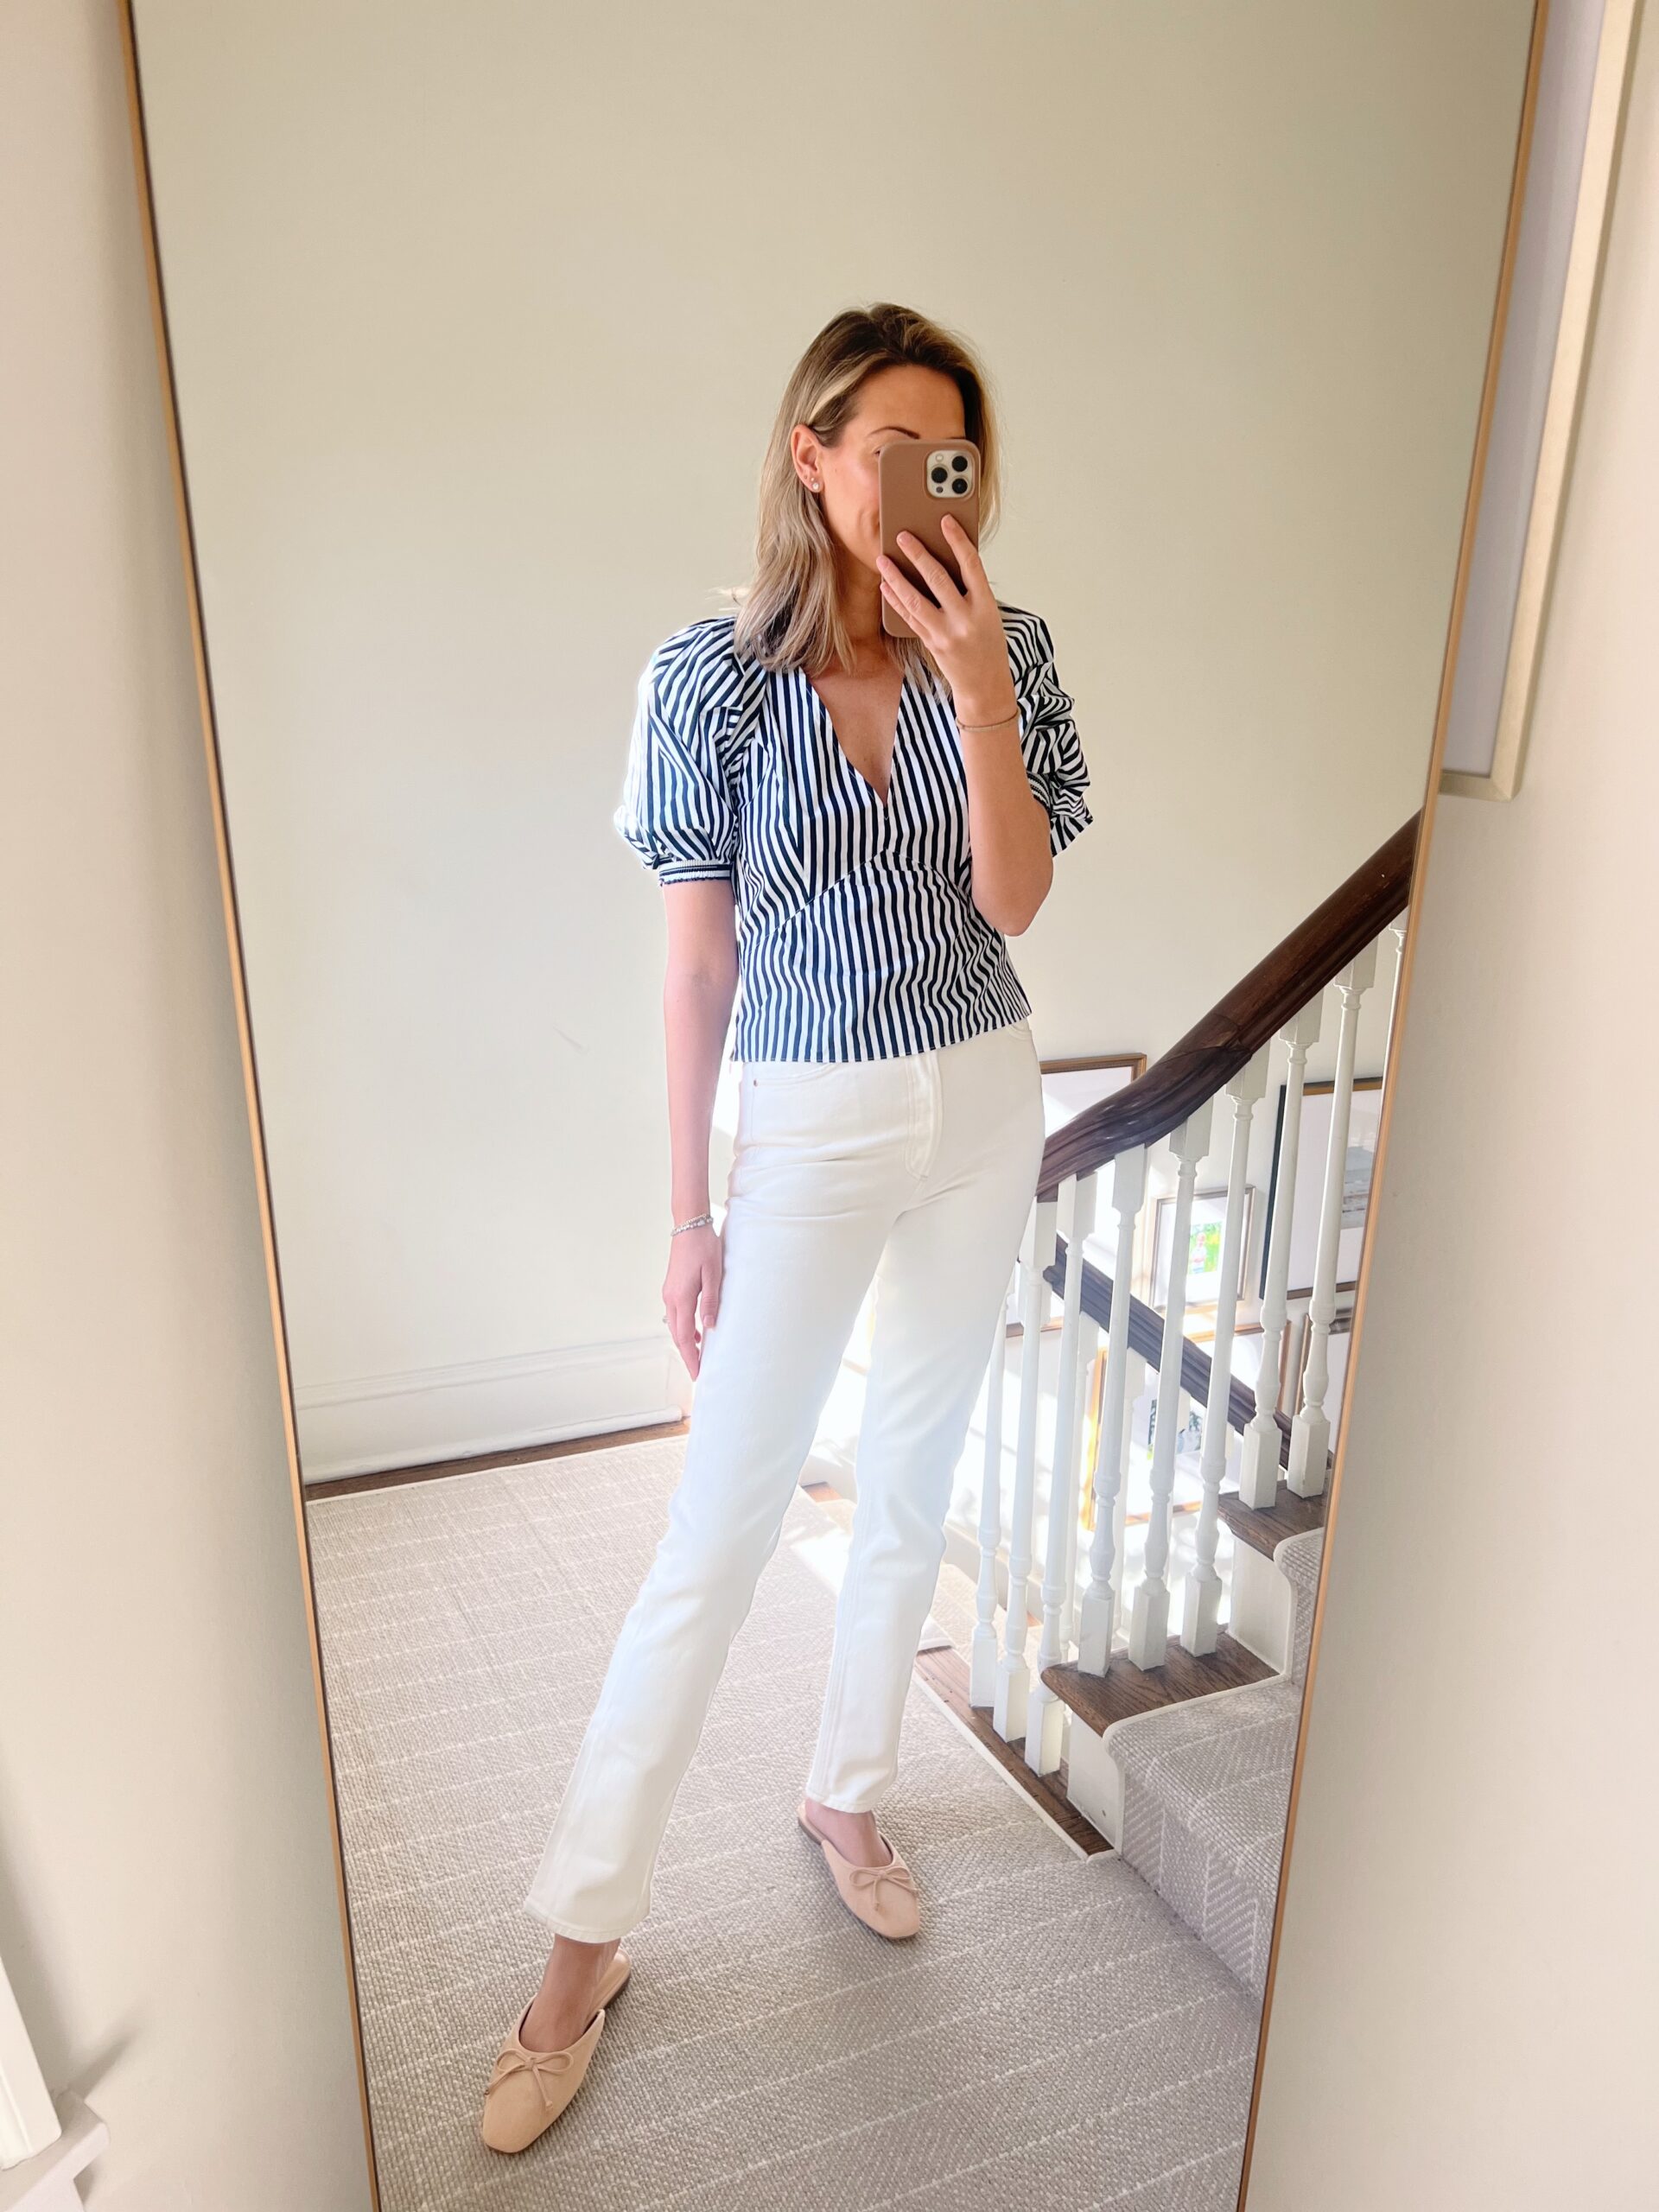 woman wearing striped top and white pants